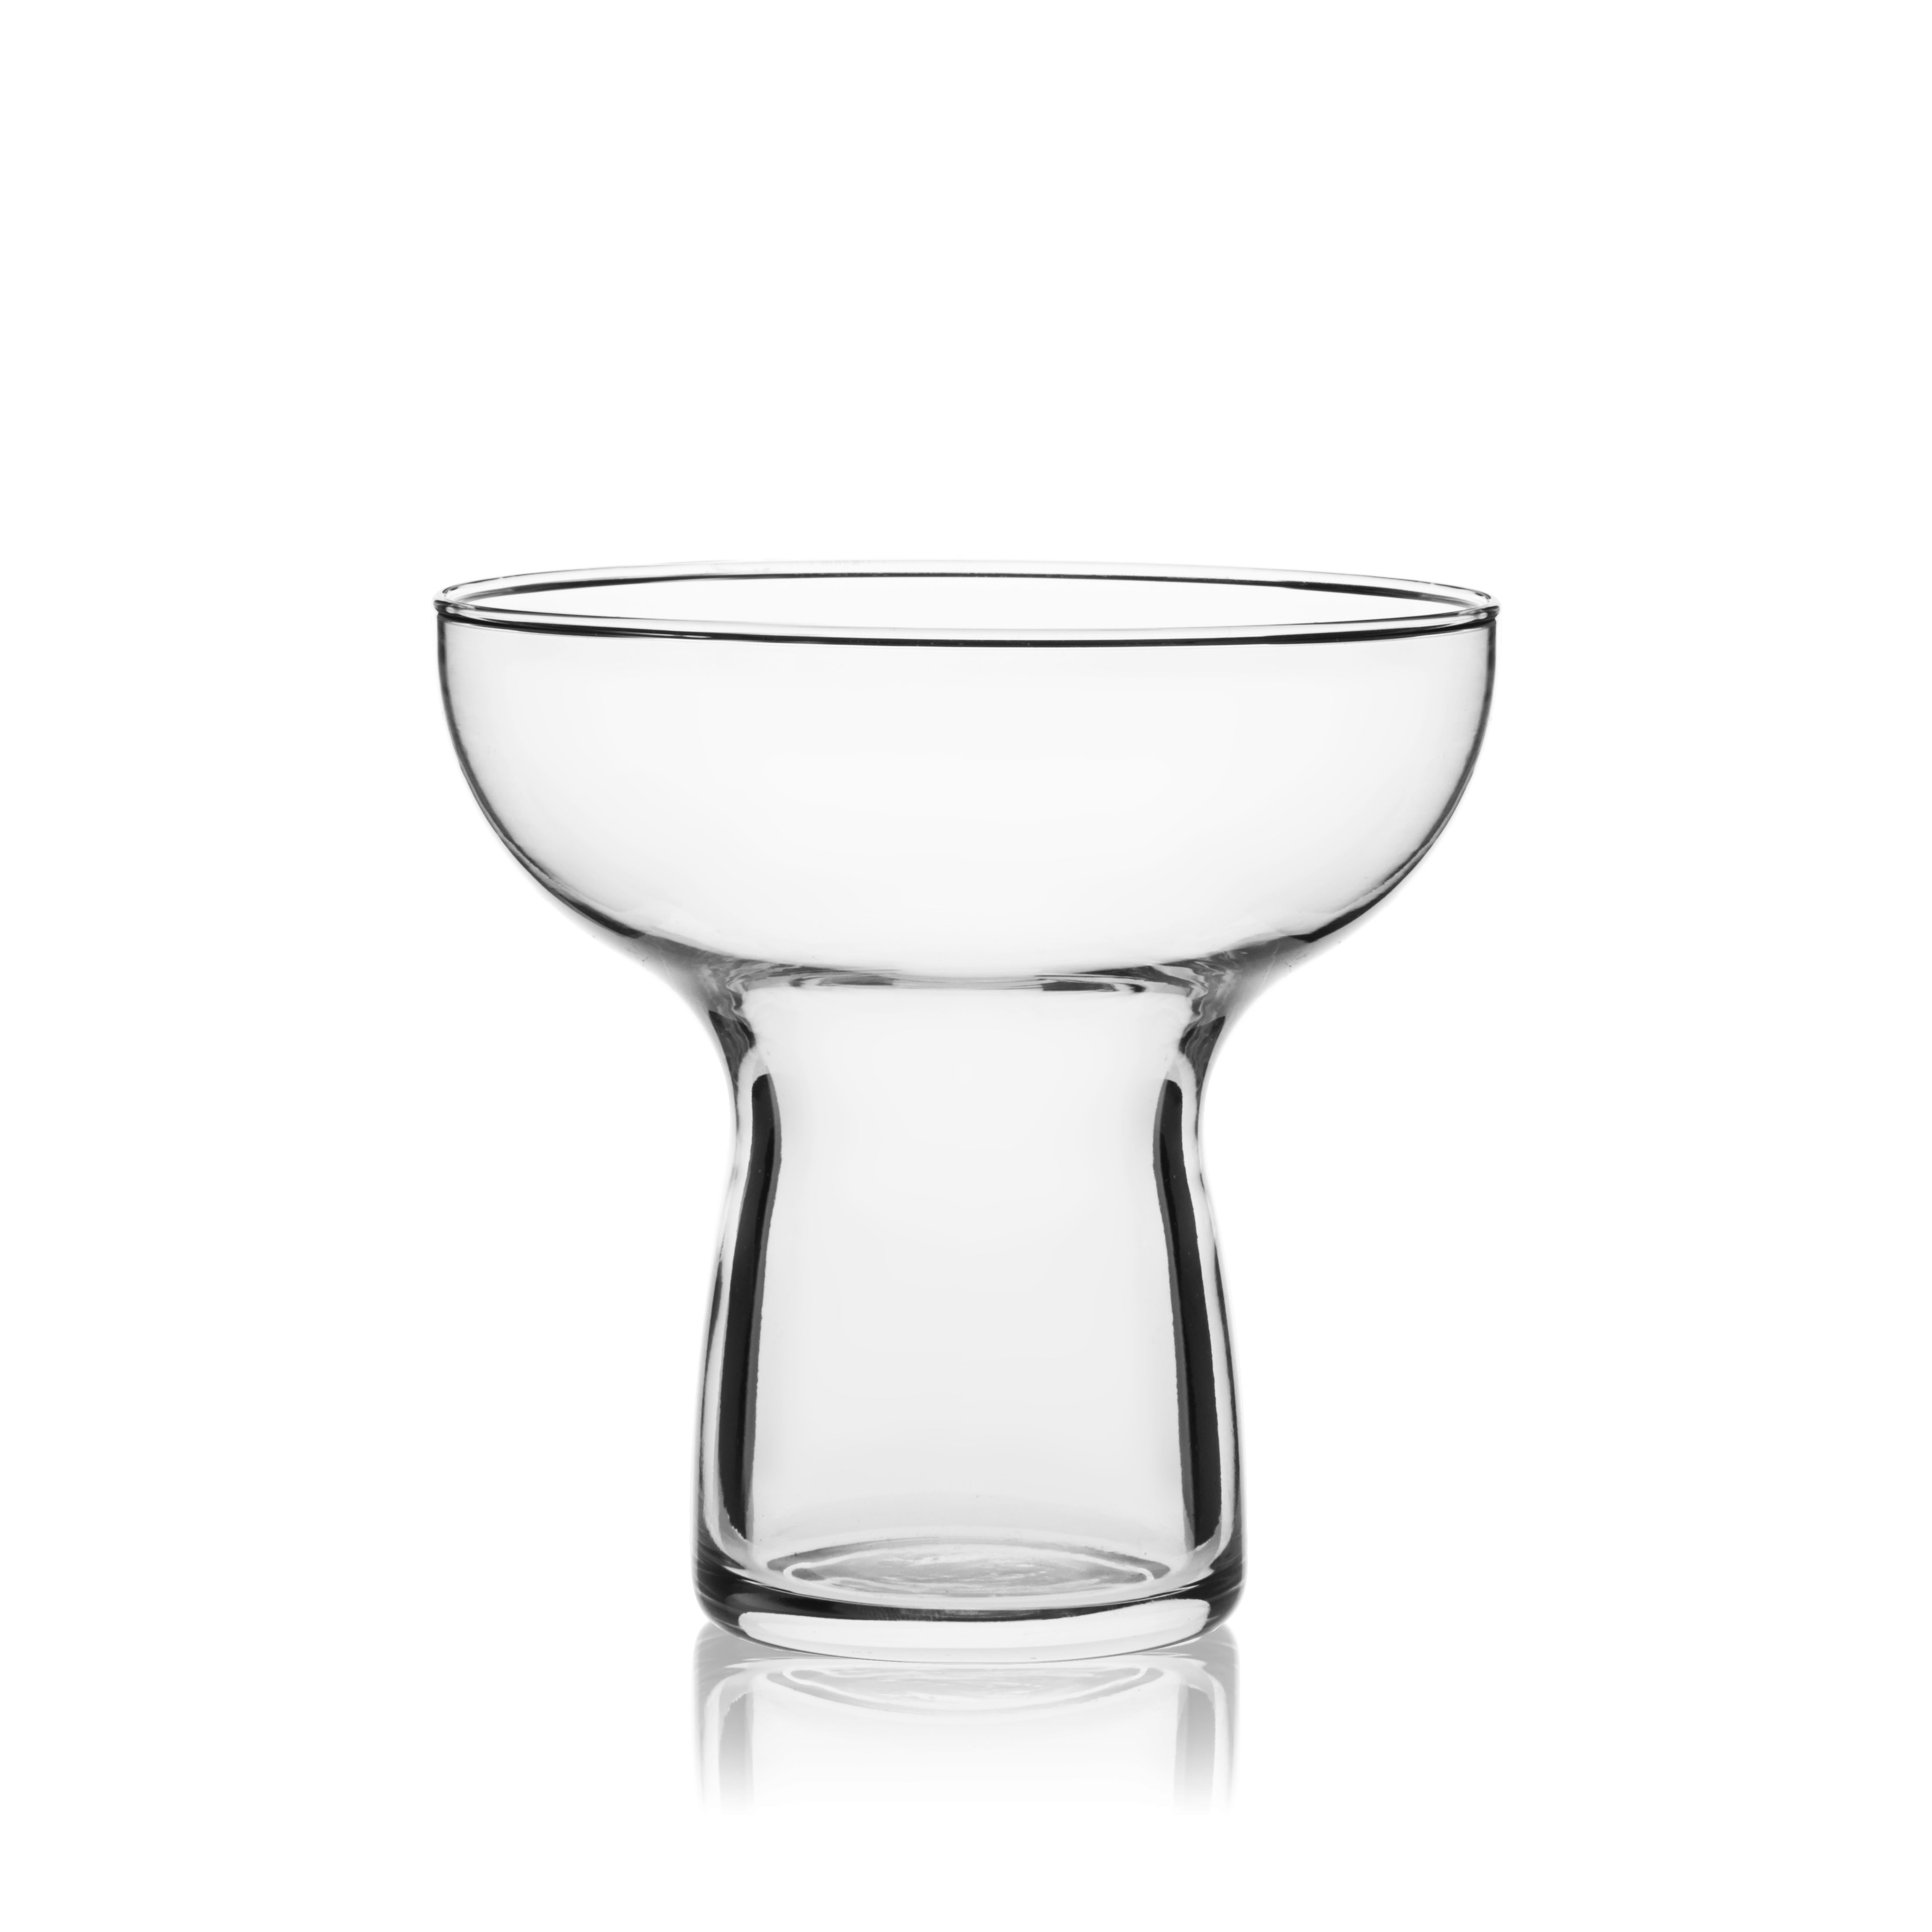 Libbey 2667 Symbio Cocktail Glass, 10.25 Ounce, Clear